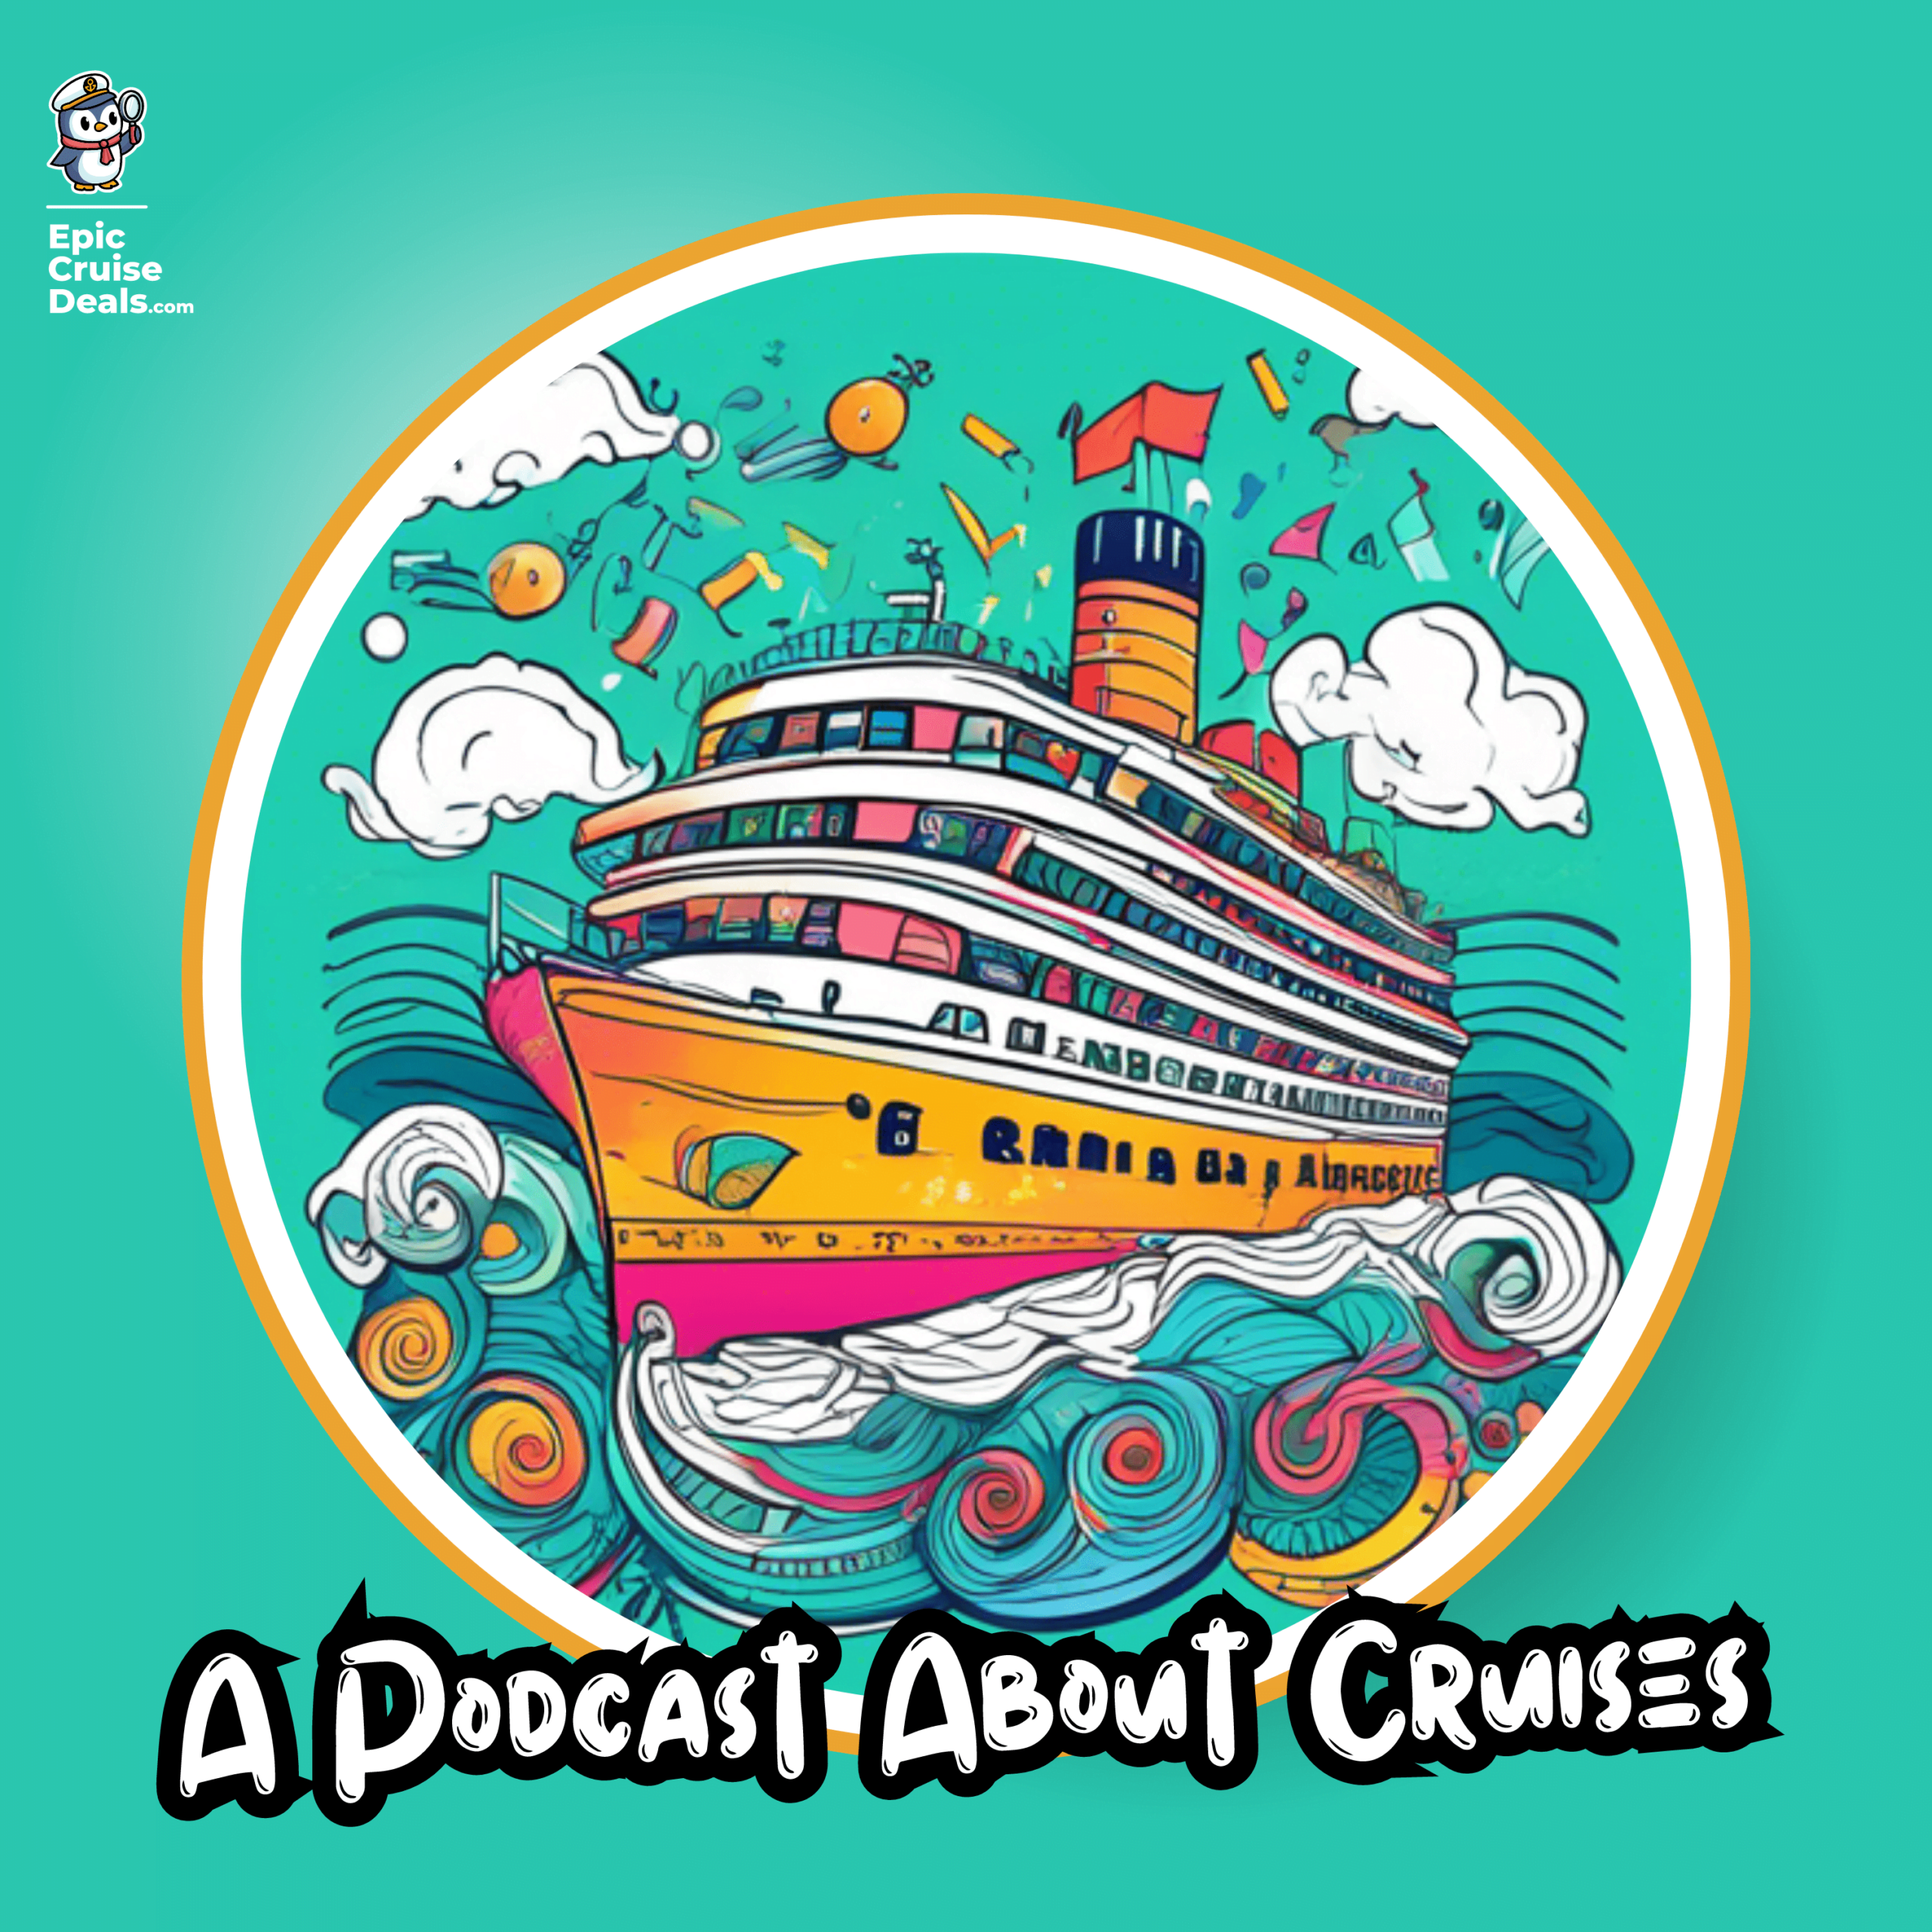 A podcast about cruises